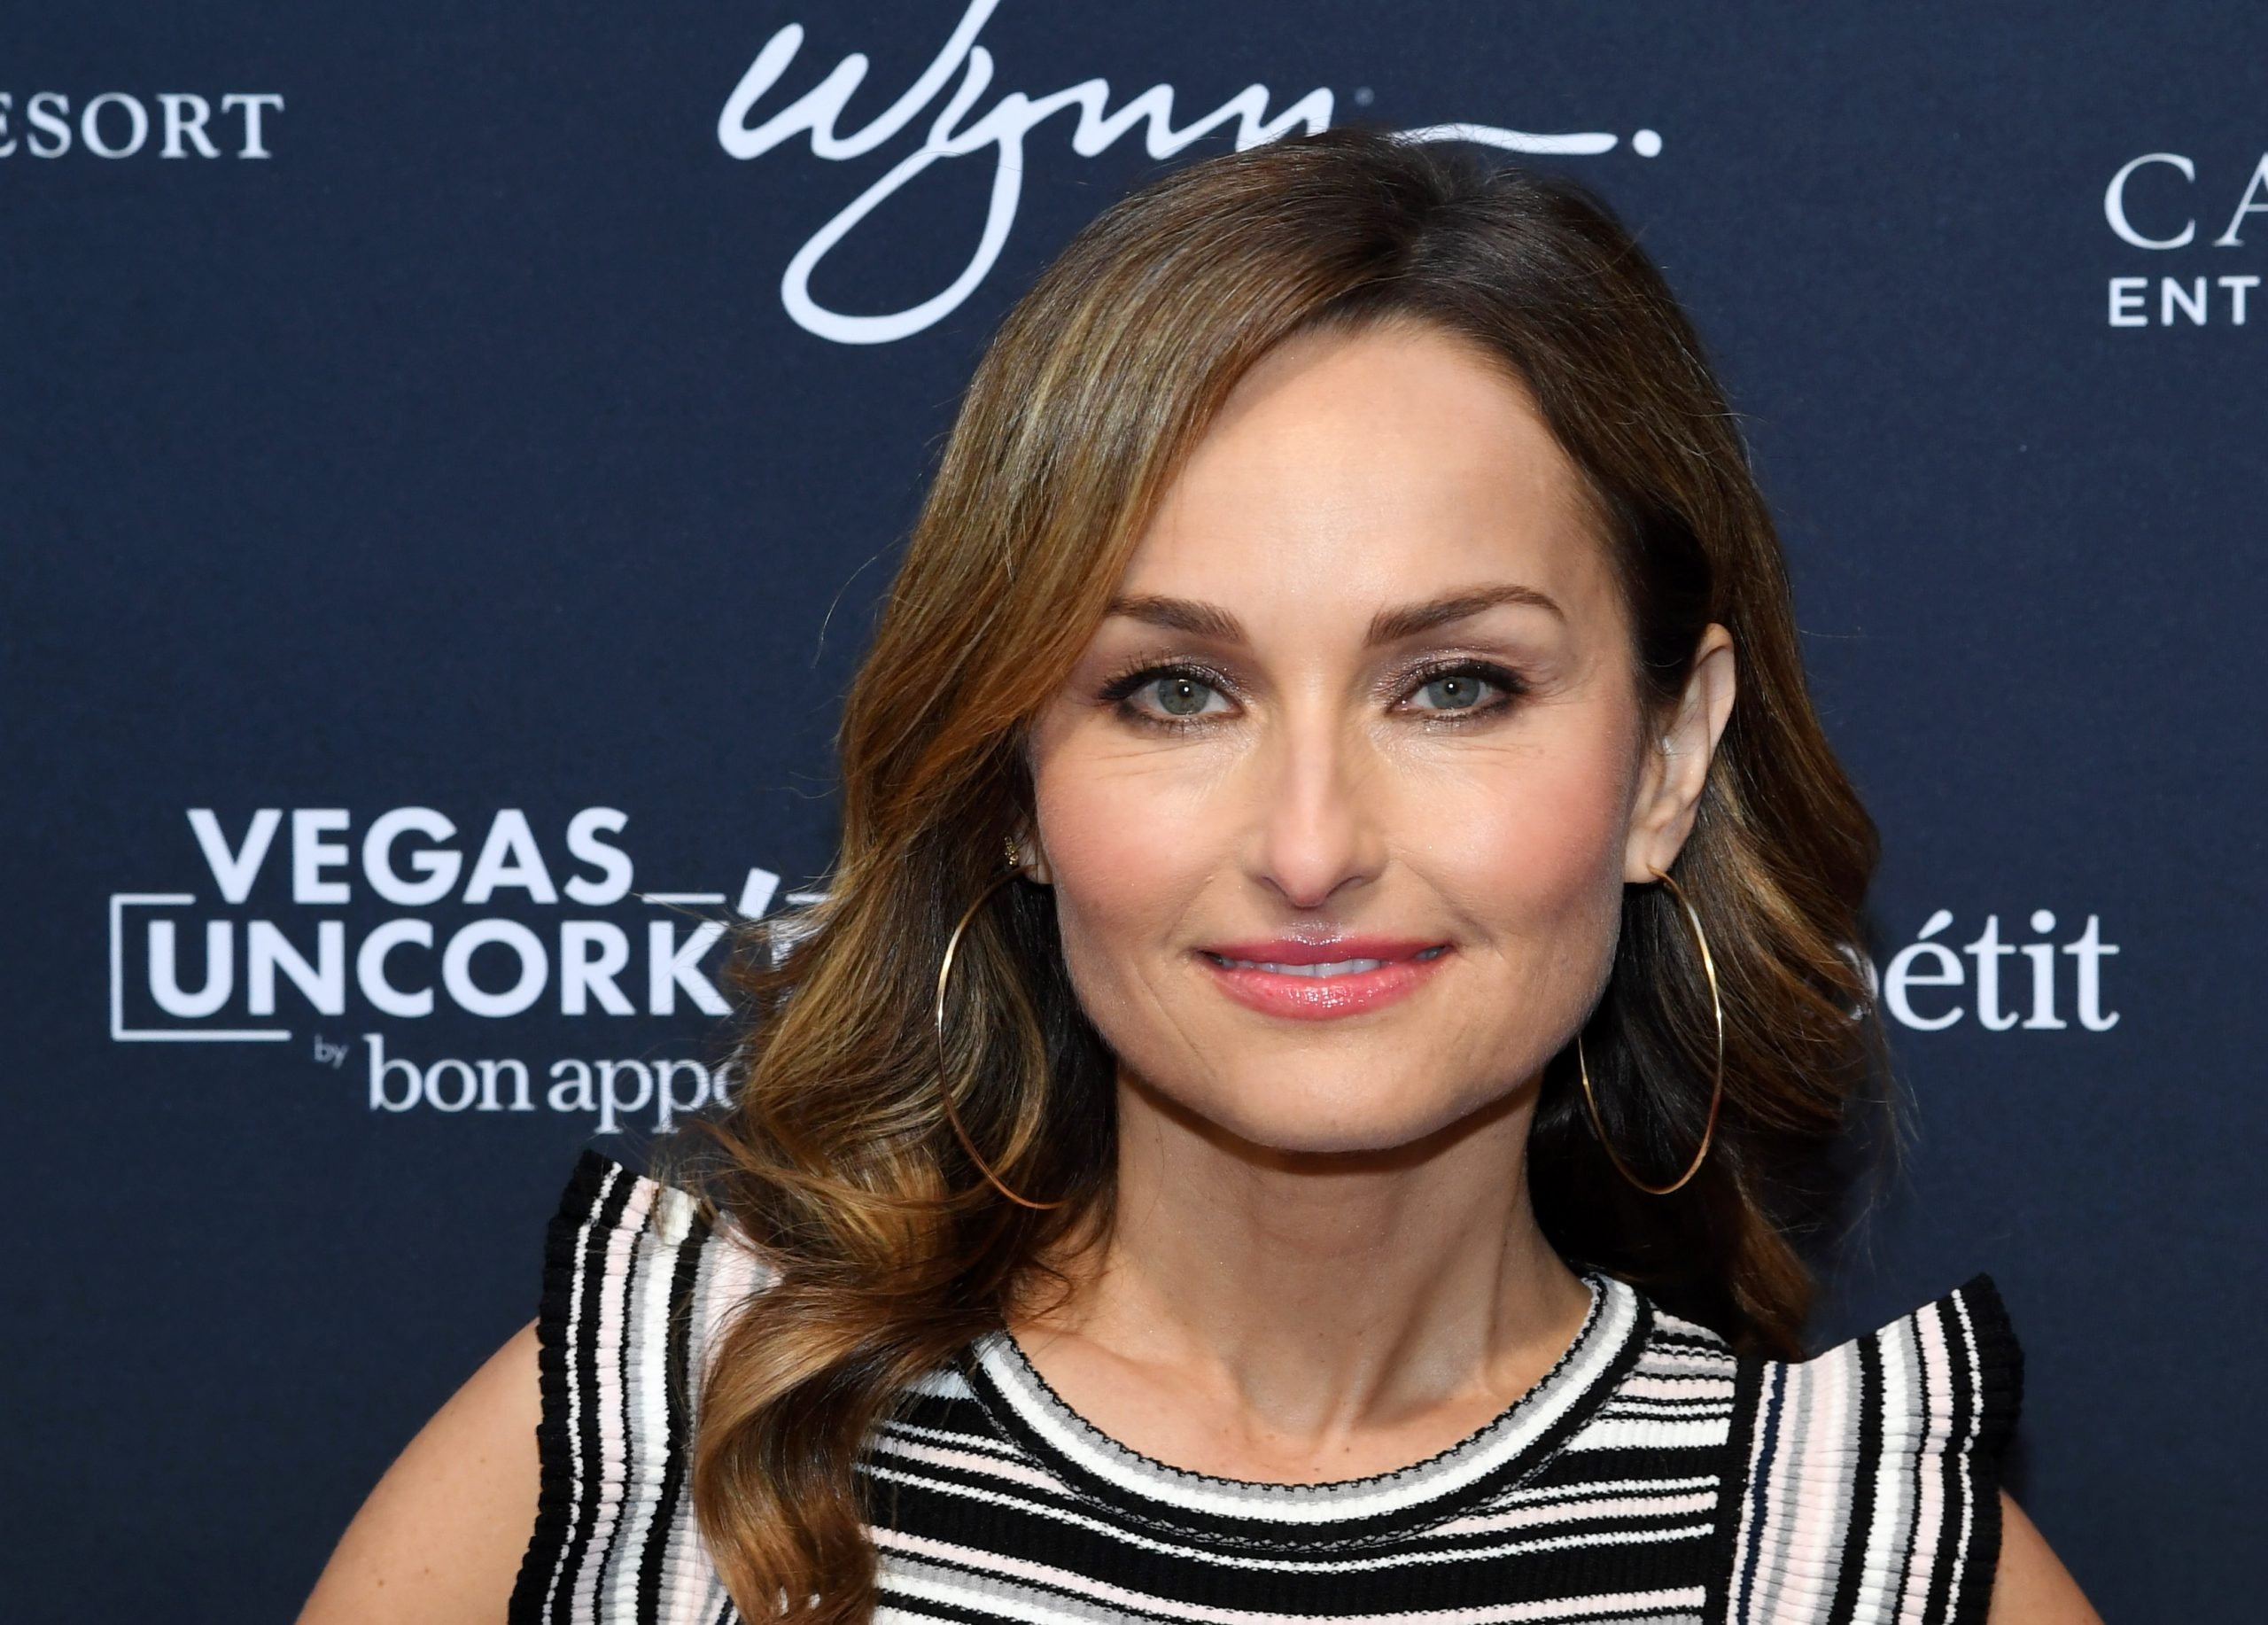 Celebrity chef Giada De Laurentiis wears a striped sleeveless blouse in this photograph.